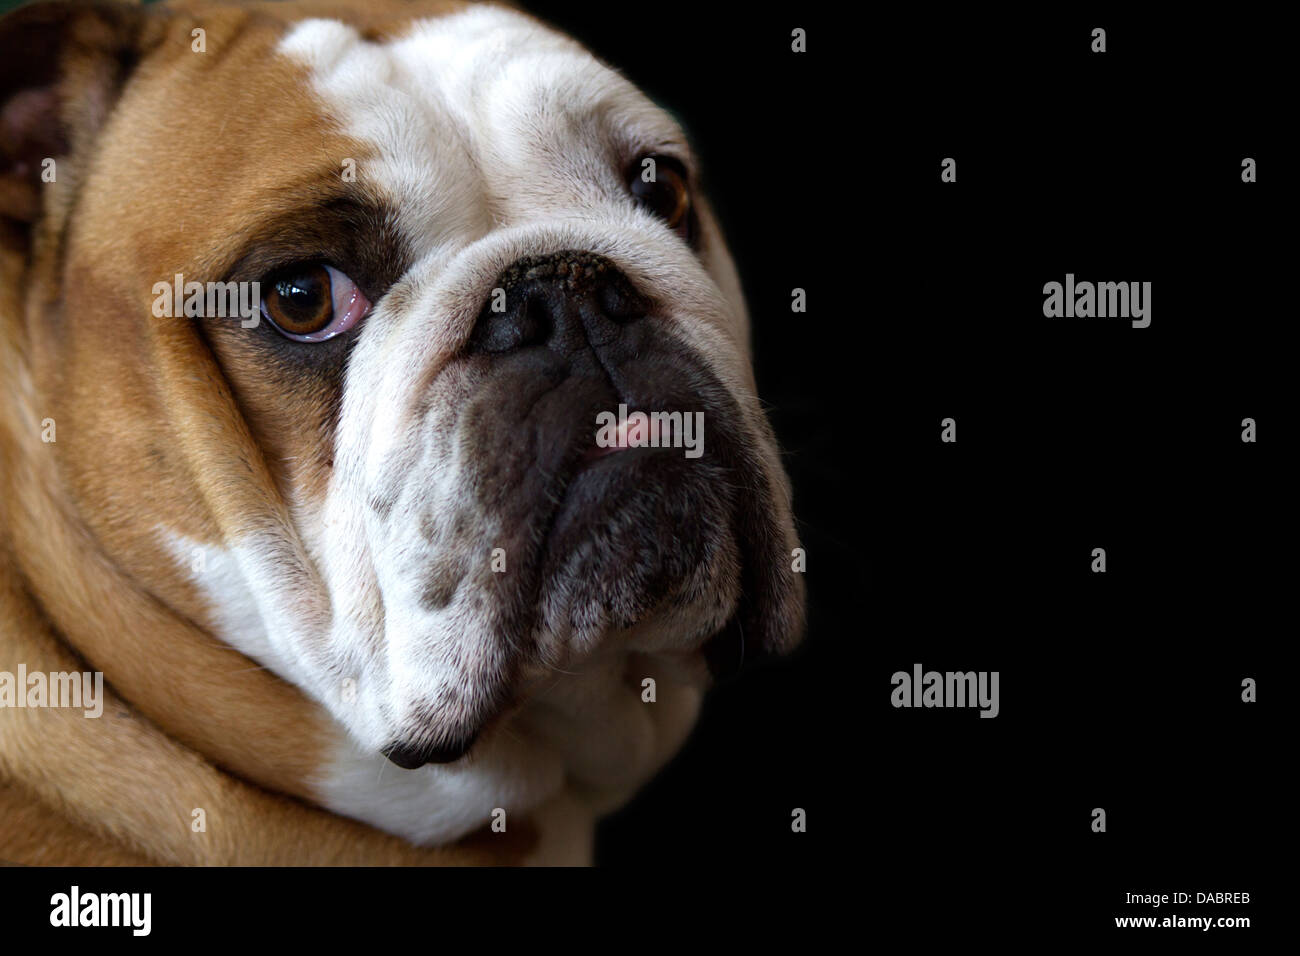 Profile view of a female English Bulldog with black background Stock Photo